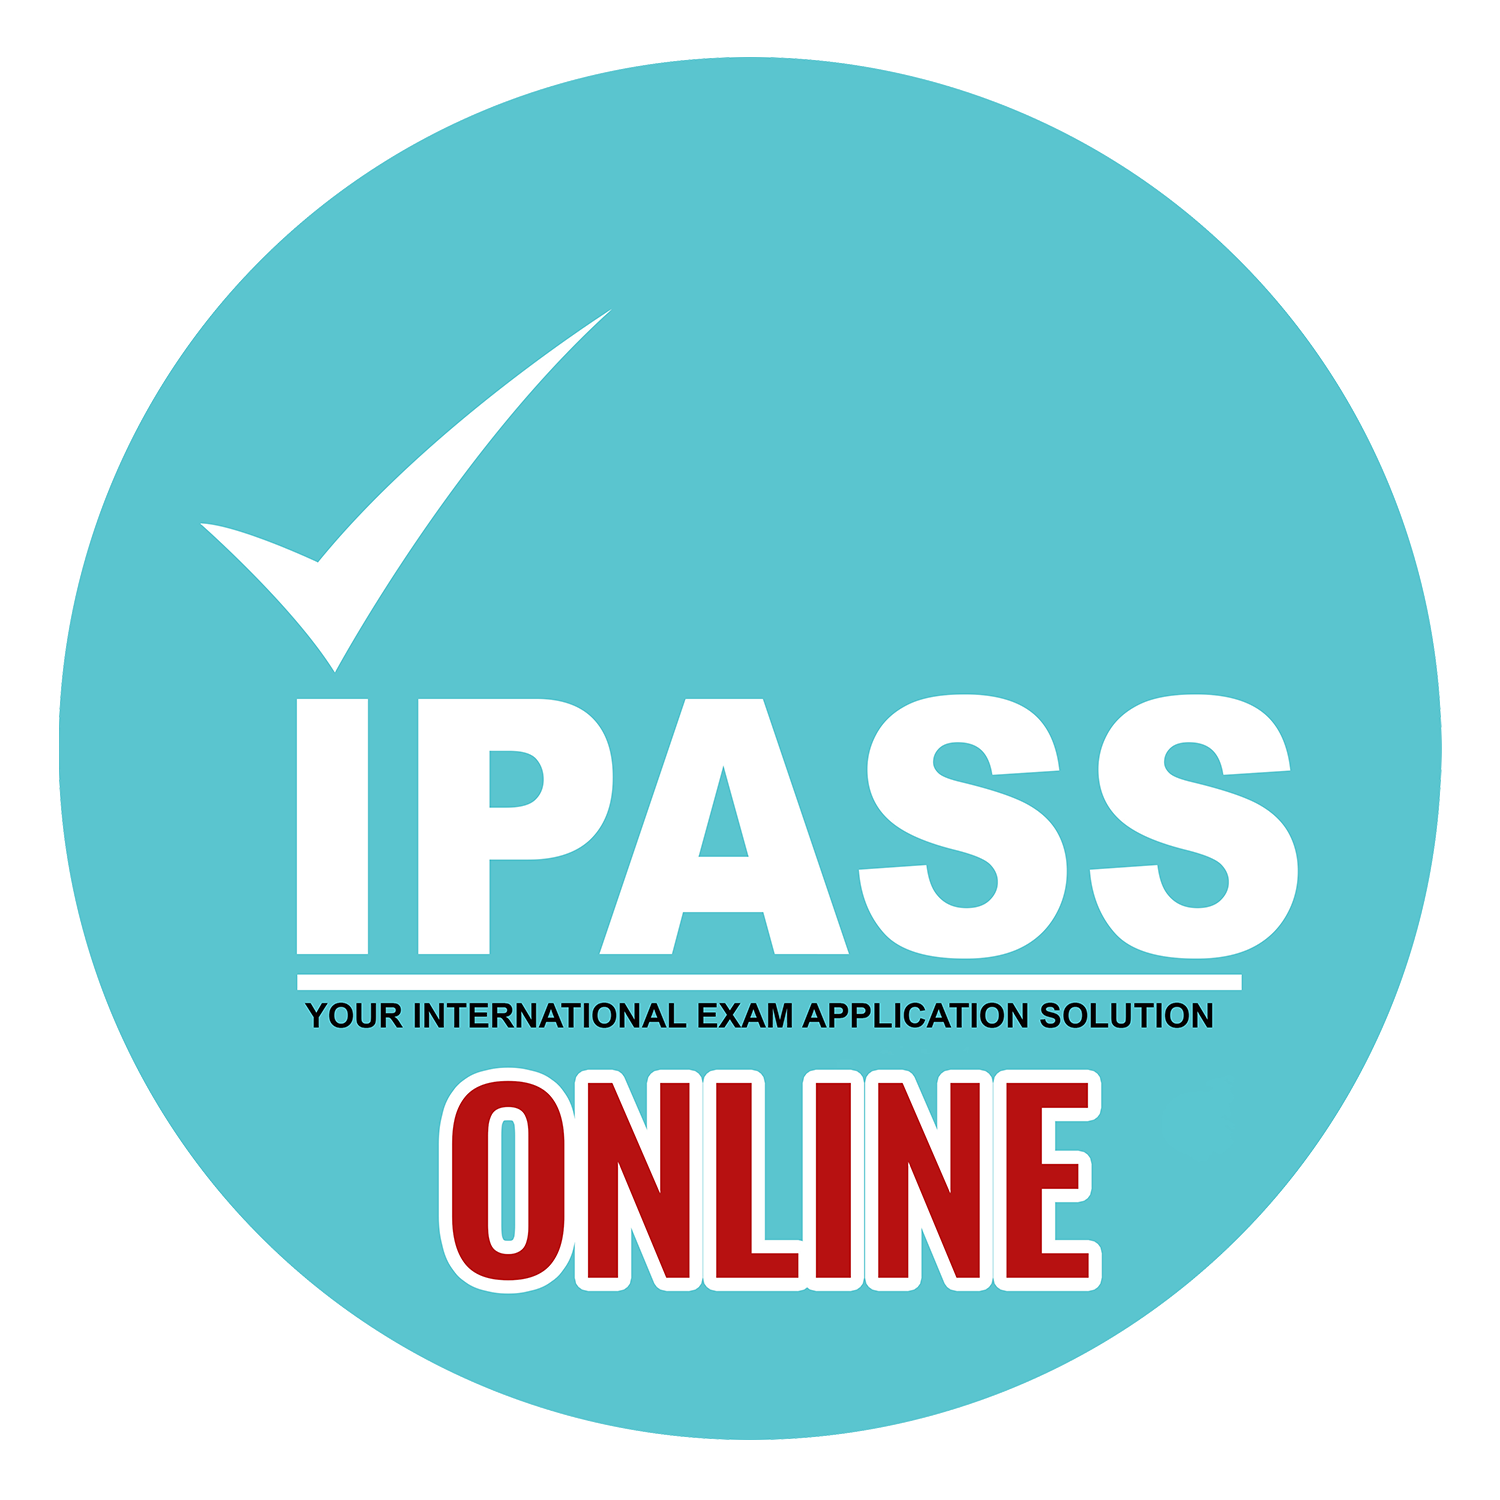 IPASS ONLINE REVIEW AND MENTORING ACADEMY